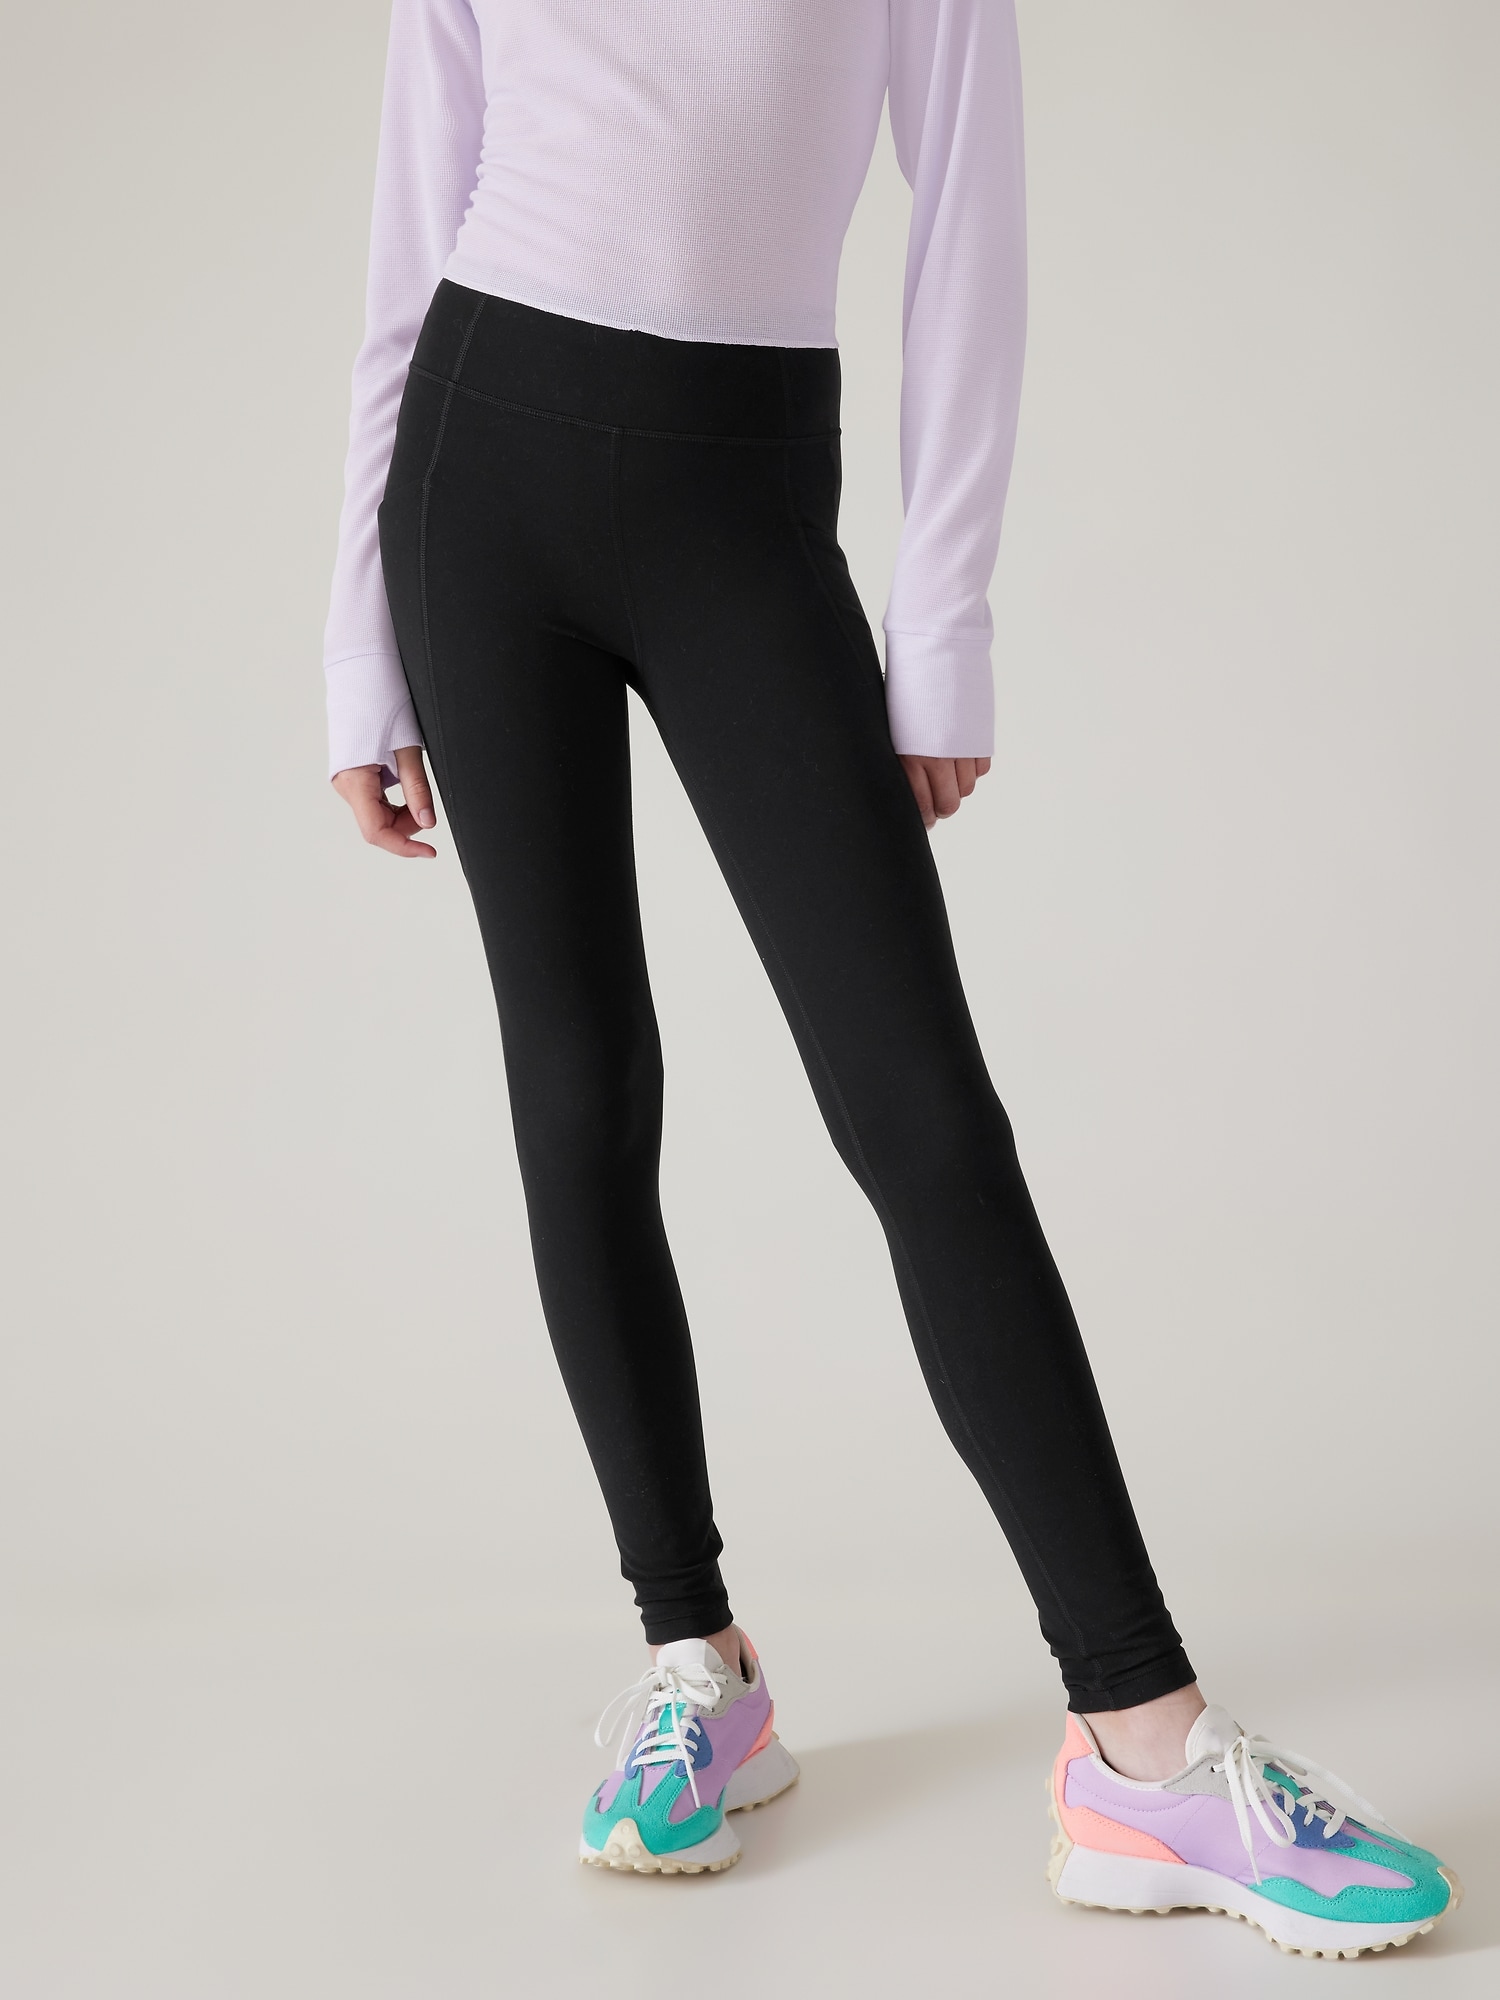 Athleta Accelerate 7/8 Tight Leggings Large Tall Blue - $30 (66% Off  Retail) - From Katlin